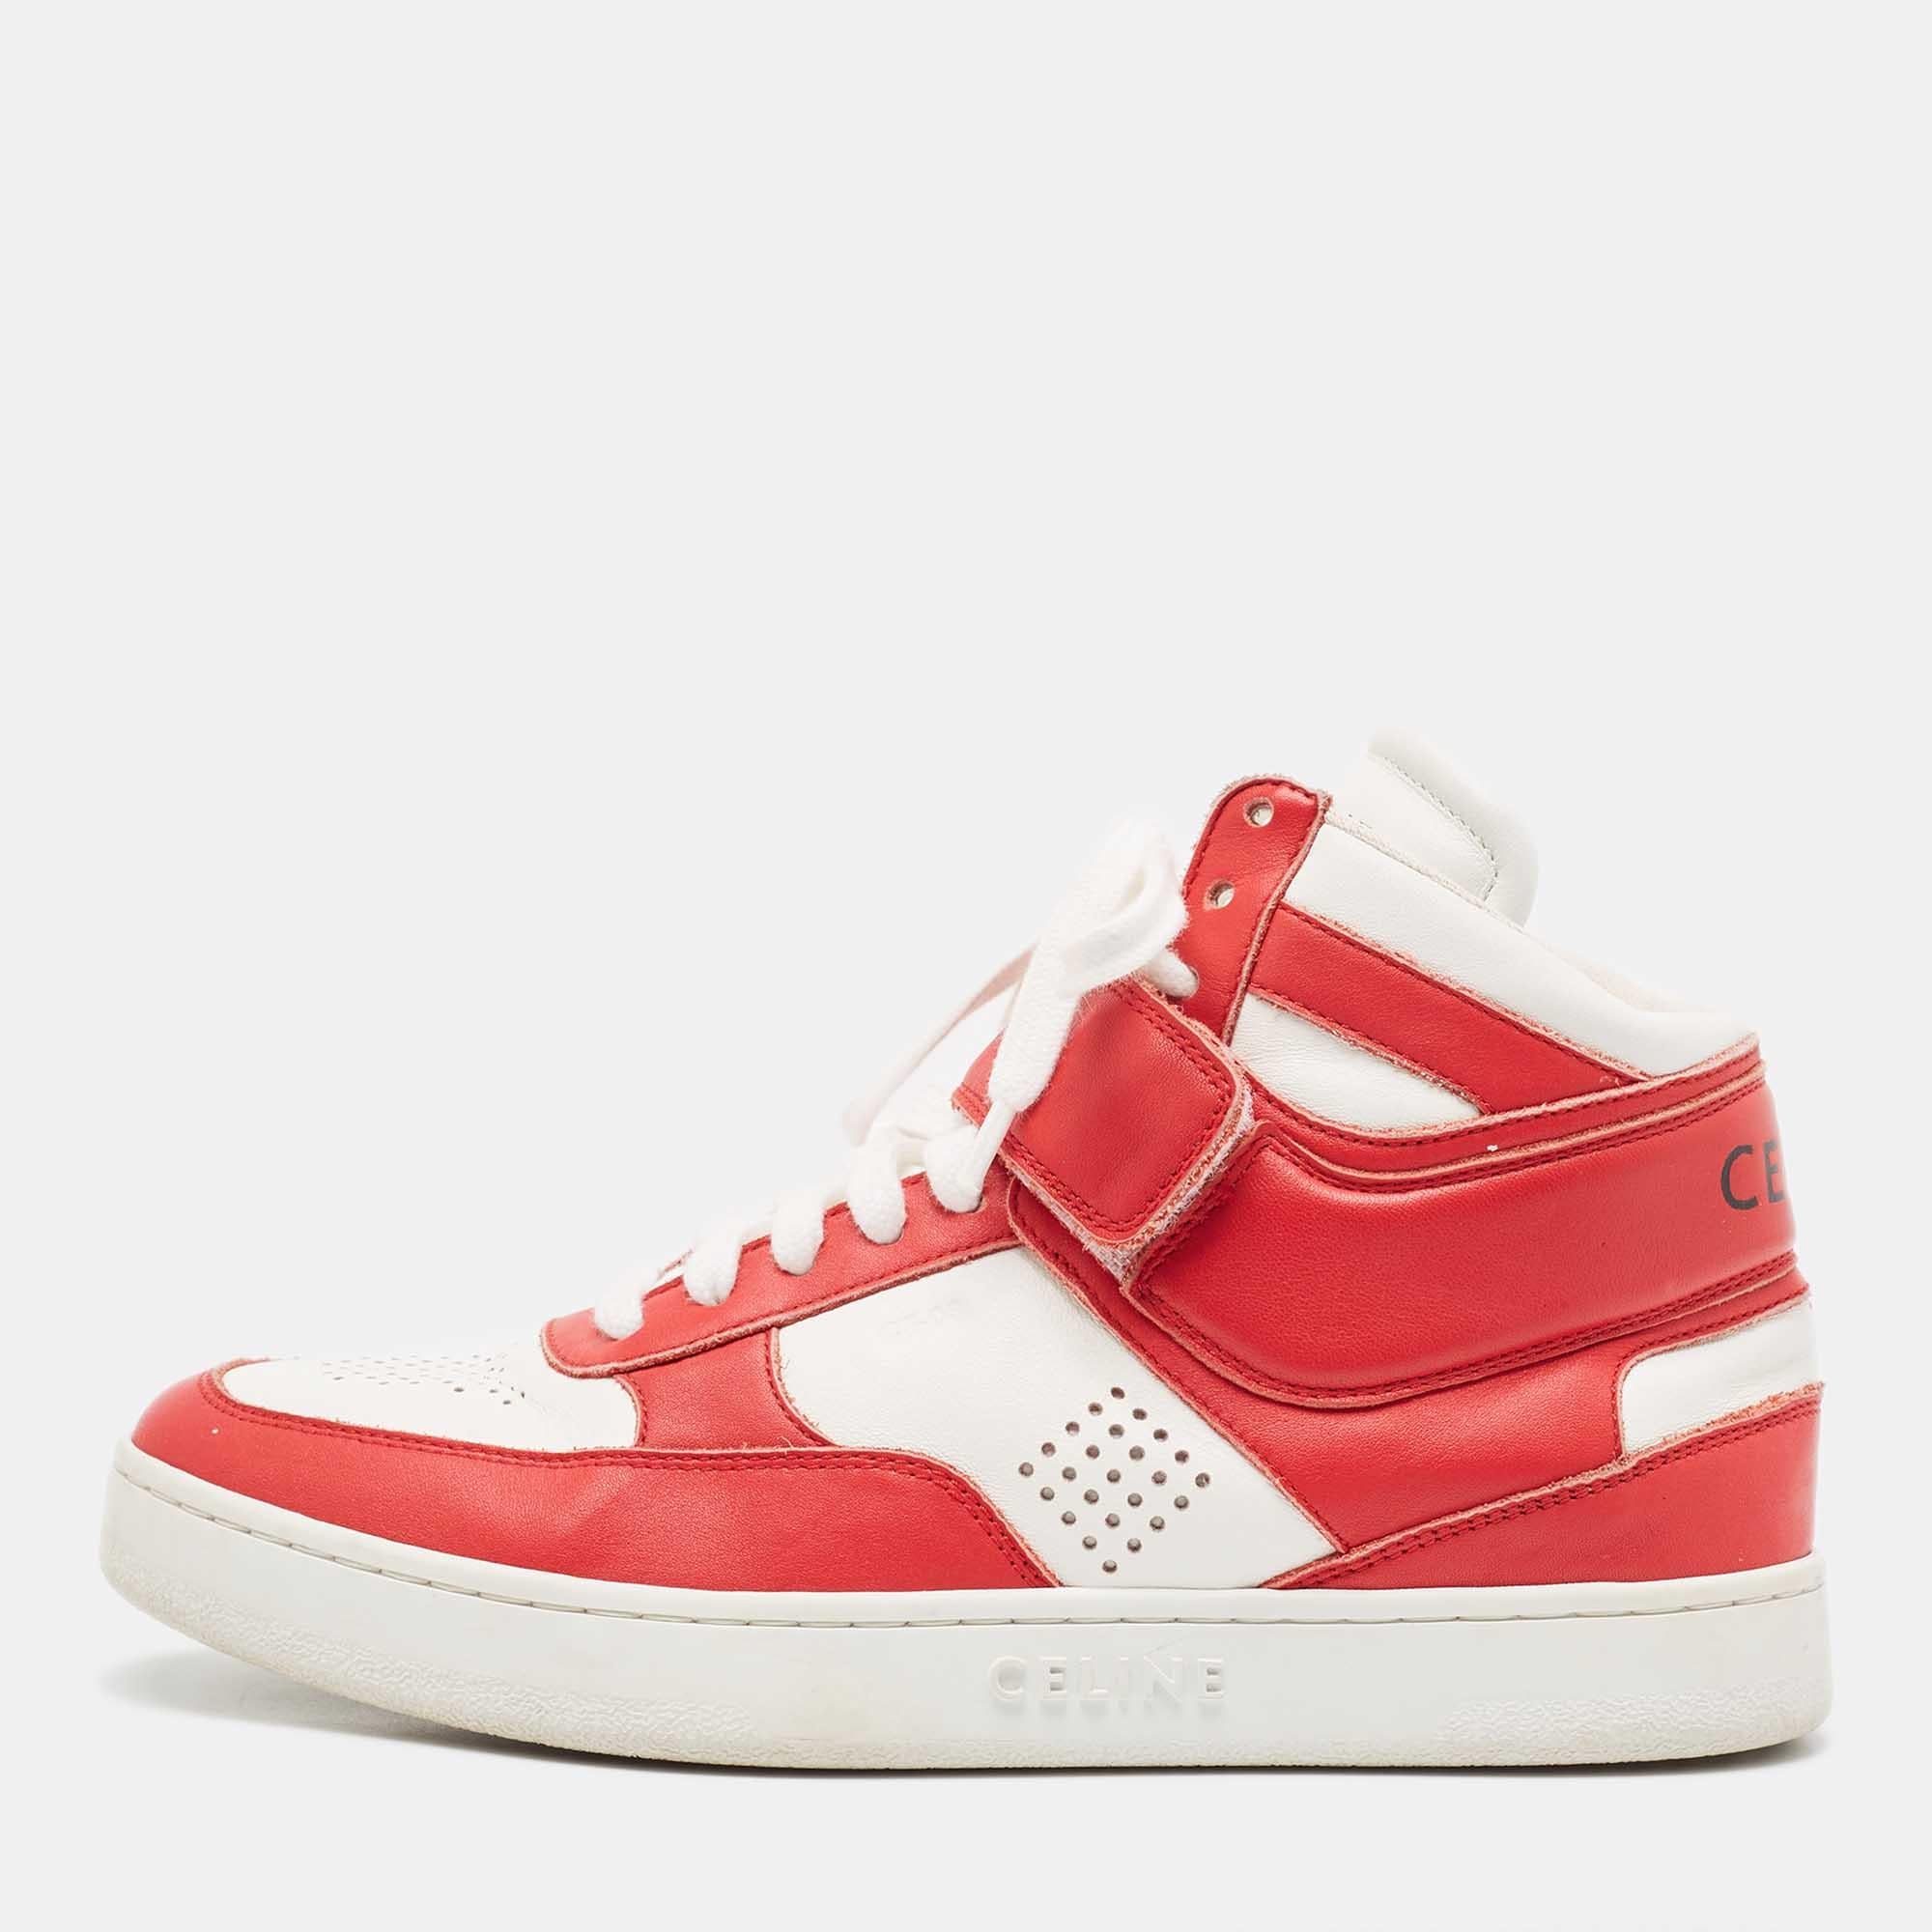 Celine Red/White Leather High Top Sneakers Size 38 For Sale 2